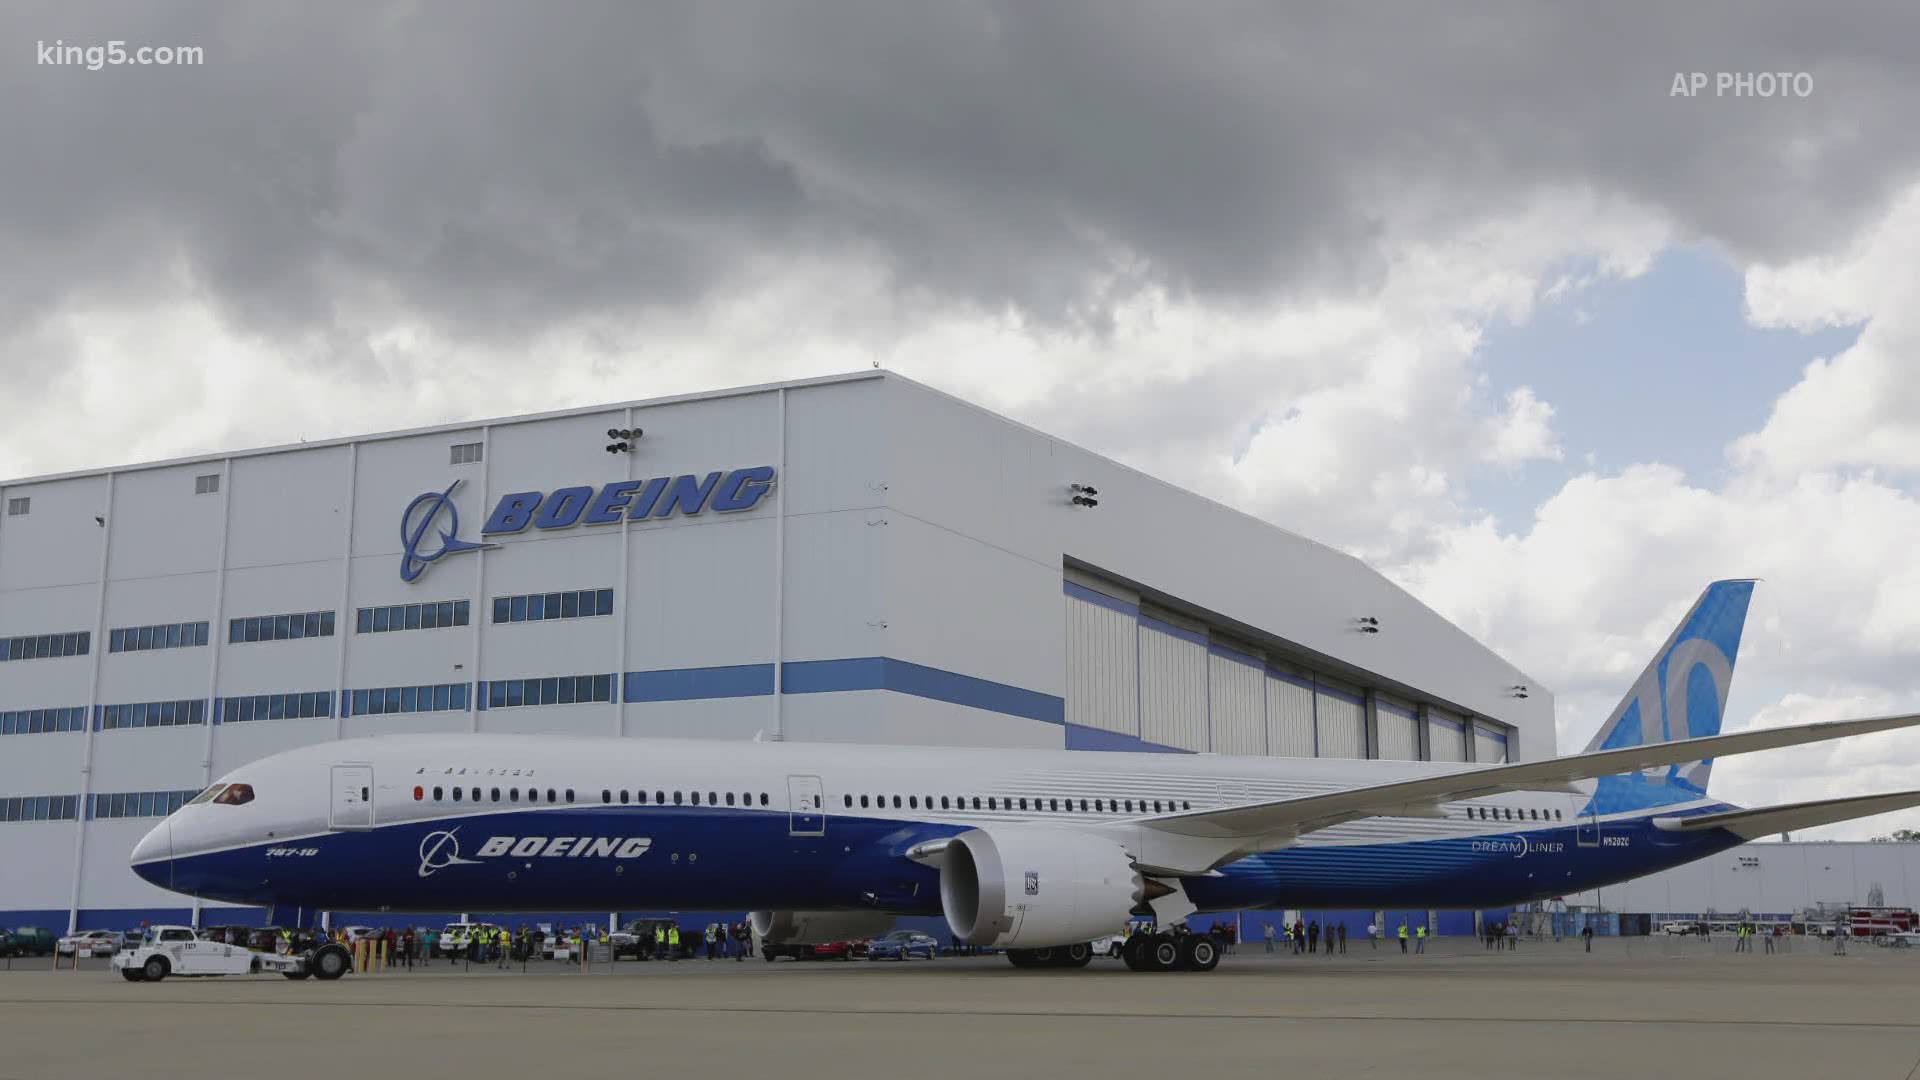 The Wall Street Journal reports Boeing is relocating production of the 787 Dreamliner from Everett to South Carolina.